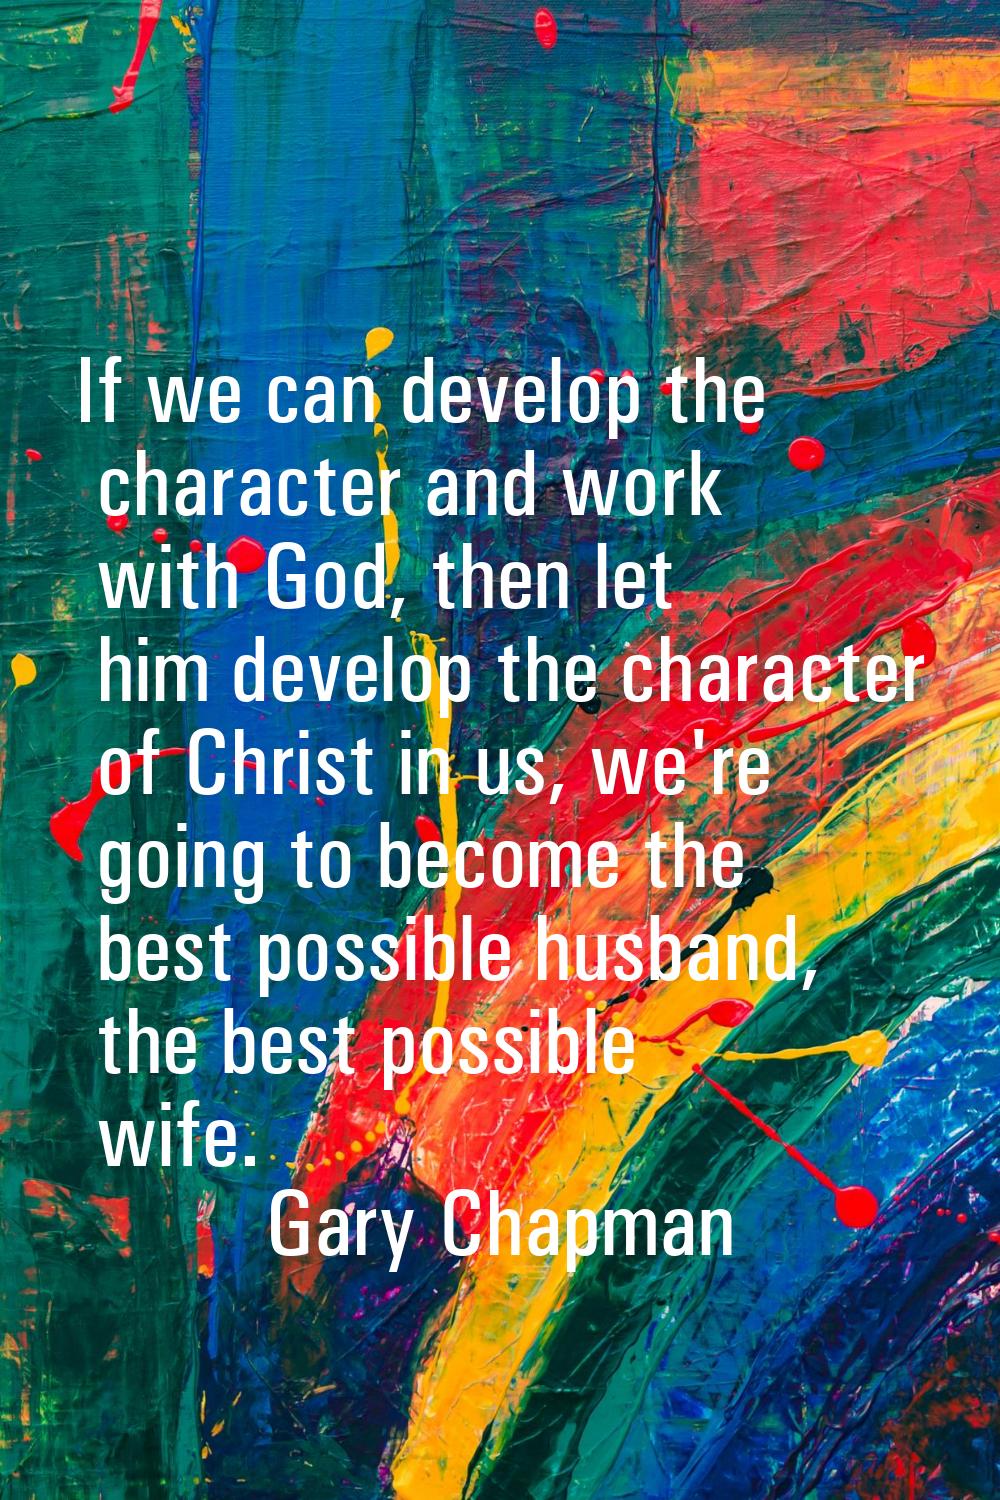 If we can develop the character and work with God, then let him develop the character of Christ in 